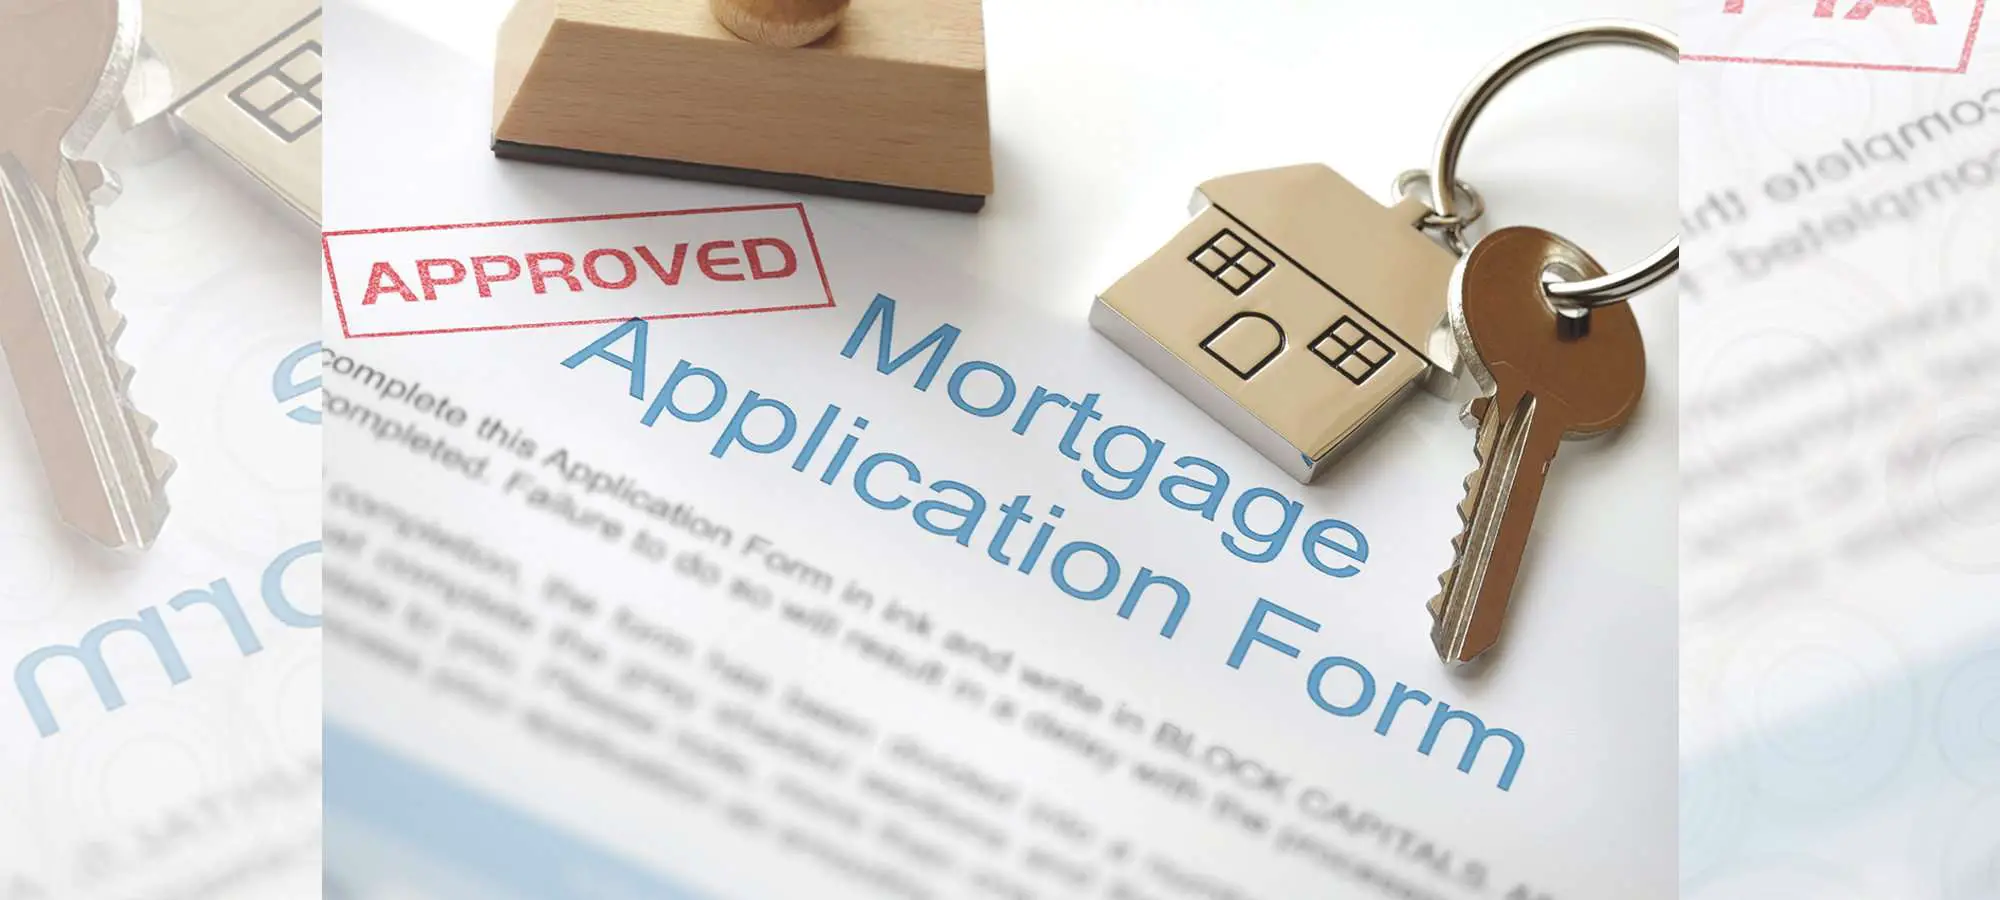 Your Approved Home Loan Could Be Withdrawn